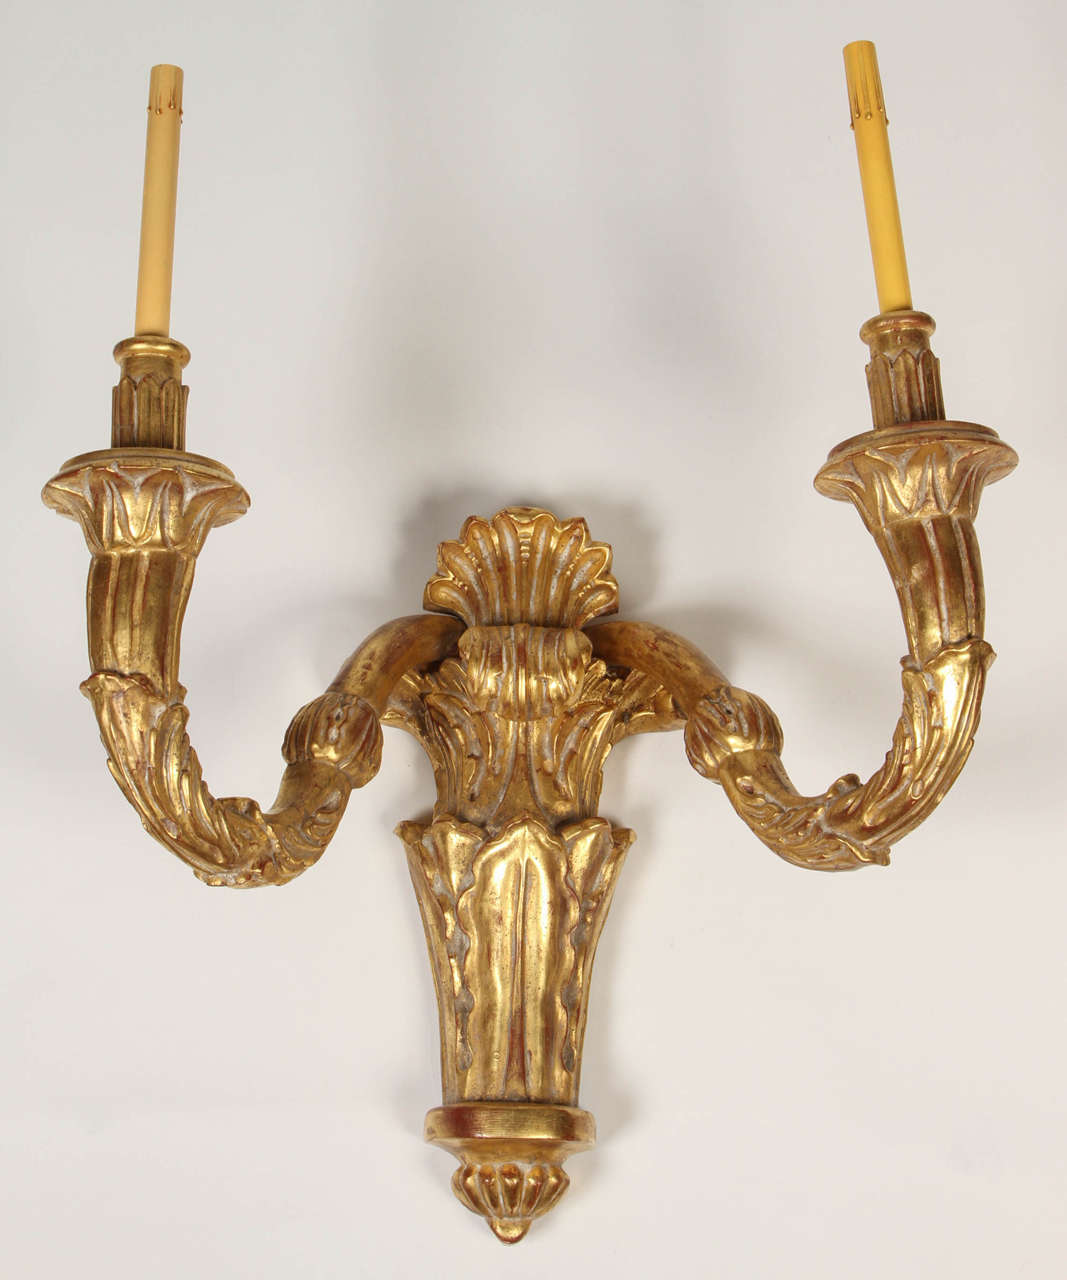 This is a magnificently large set of four giltwood wall lights in the Louis XVI style. Each featuring two arms and wonderfully carved details. They would make a dramatic statement placed down a large hallway or used as ambient light in a dining room.